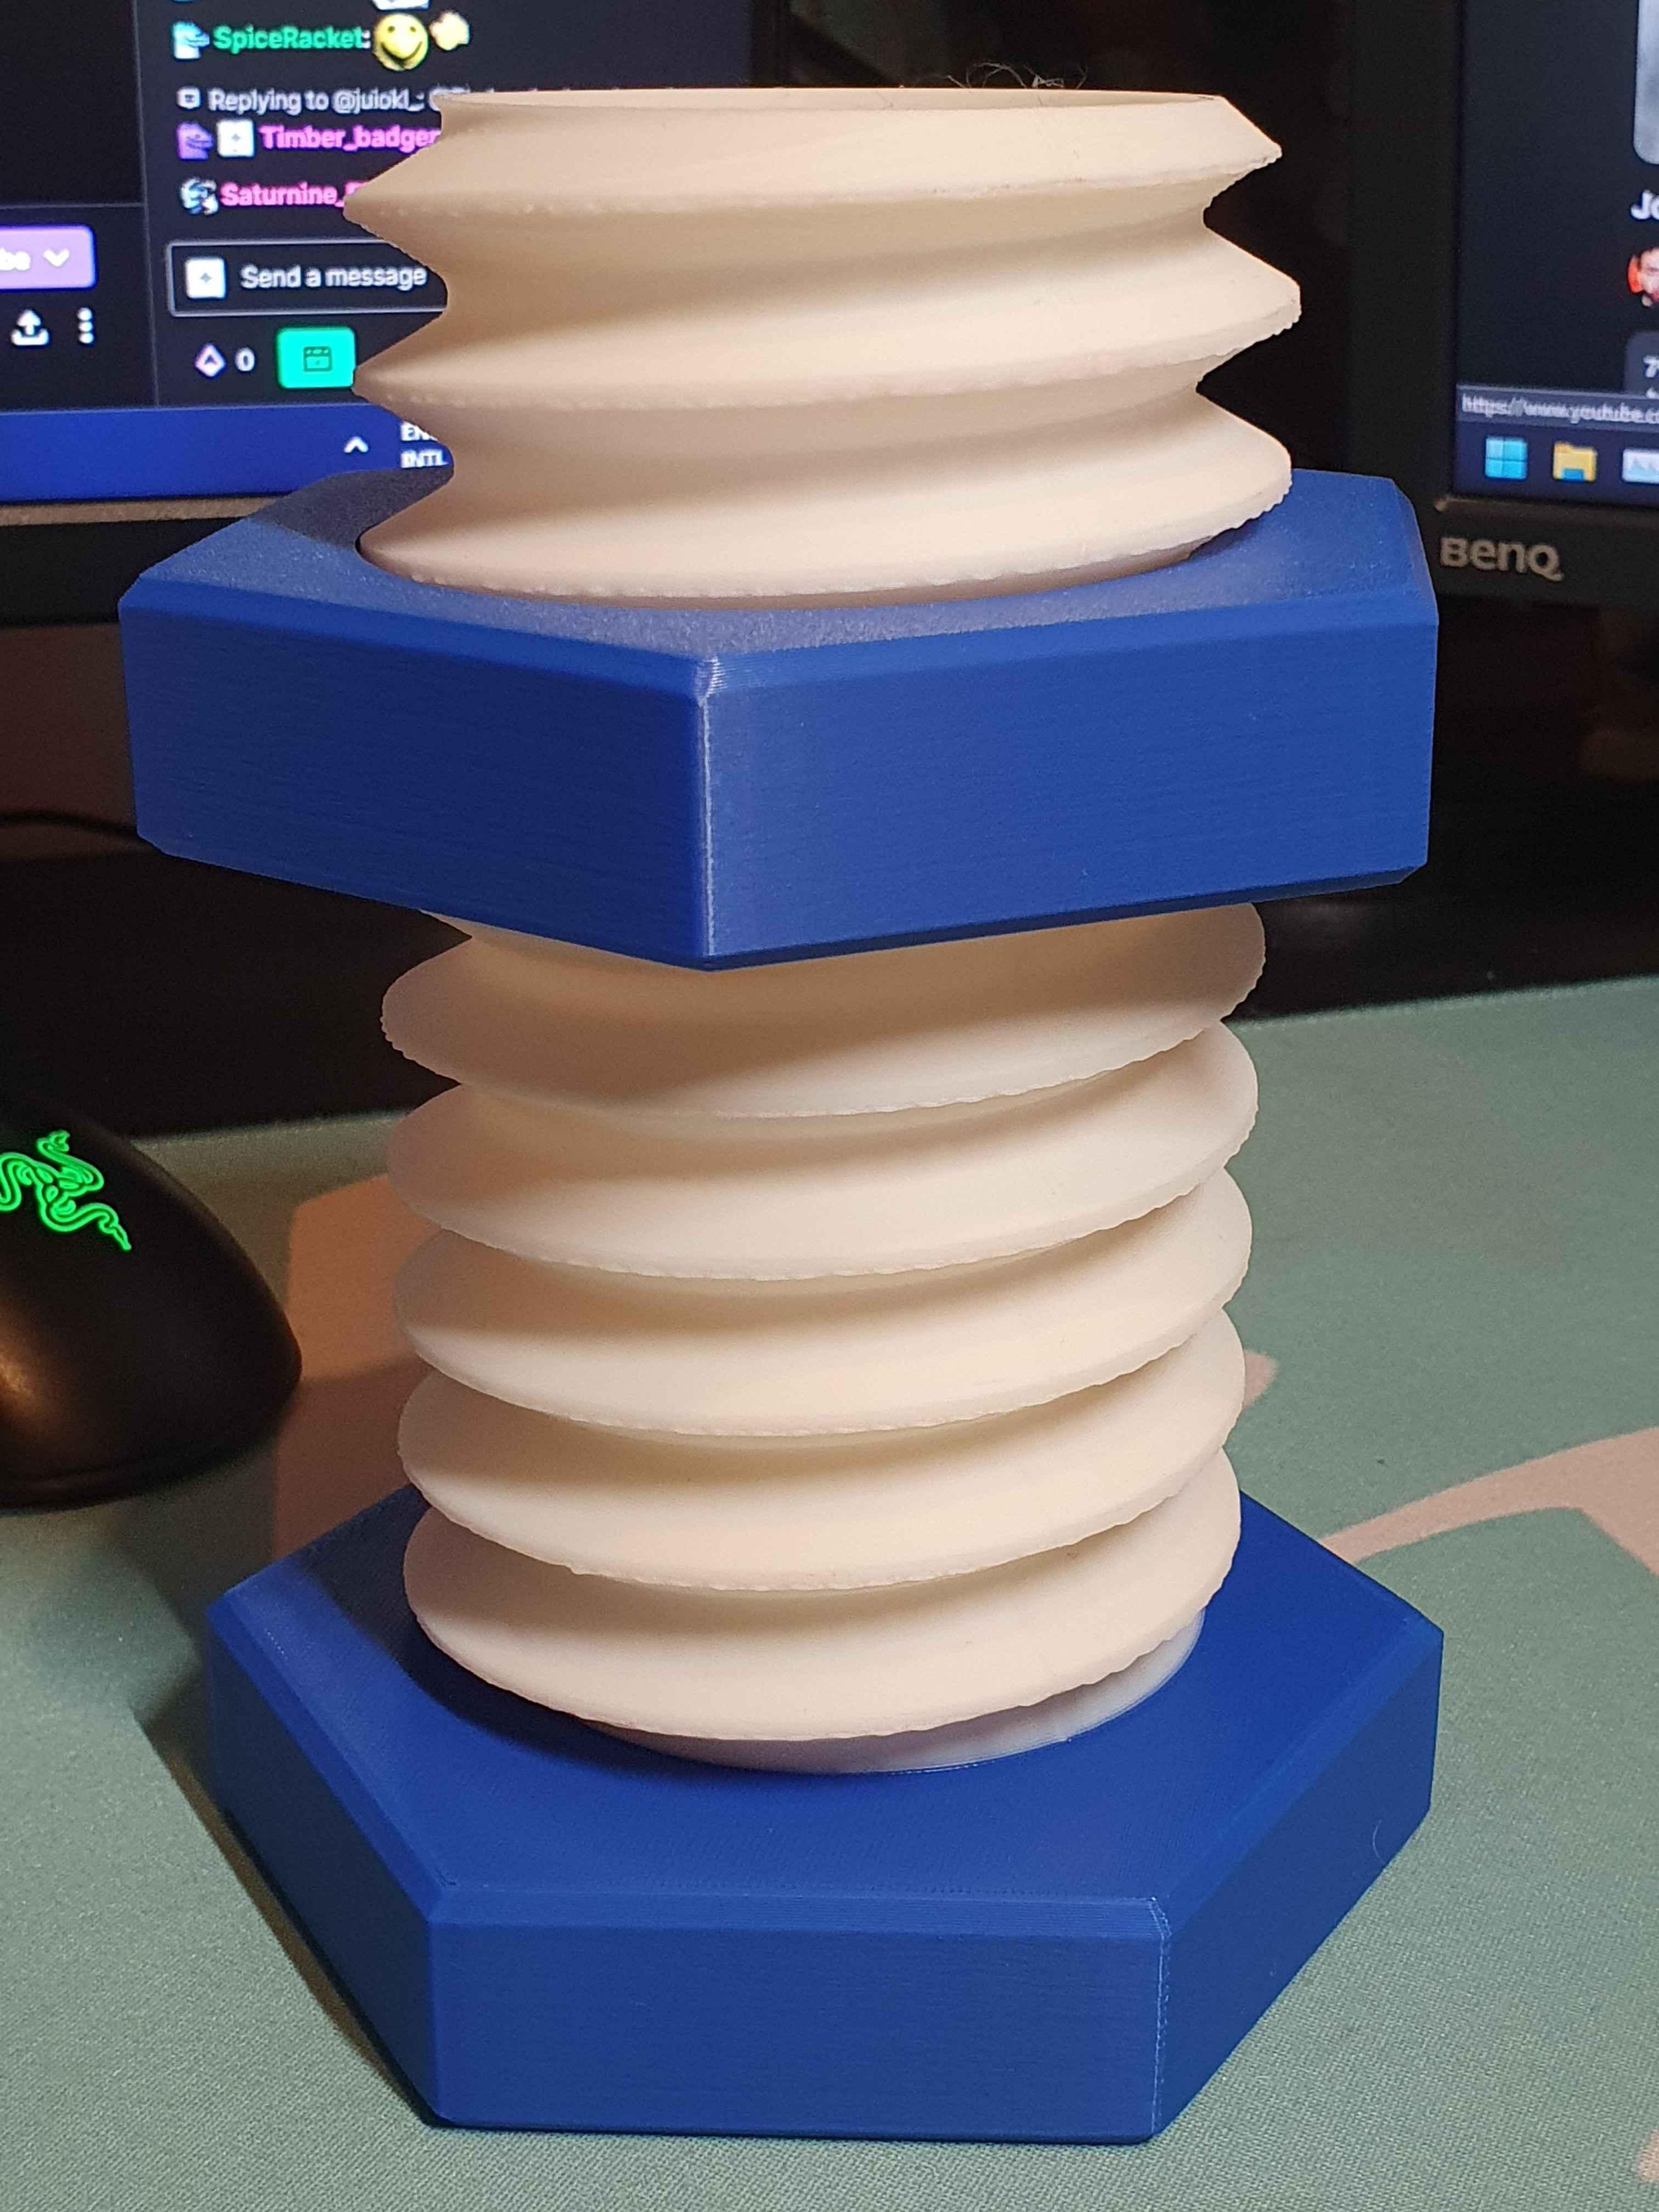 ScrewZ Koozie - The Functional Screw Can Koozie - Quite fun to play with - 3d model